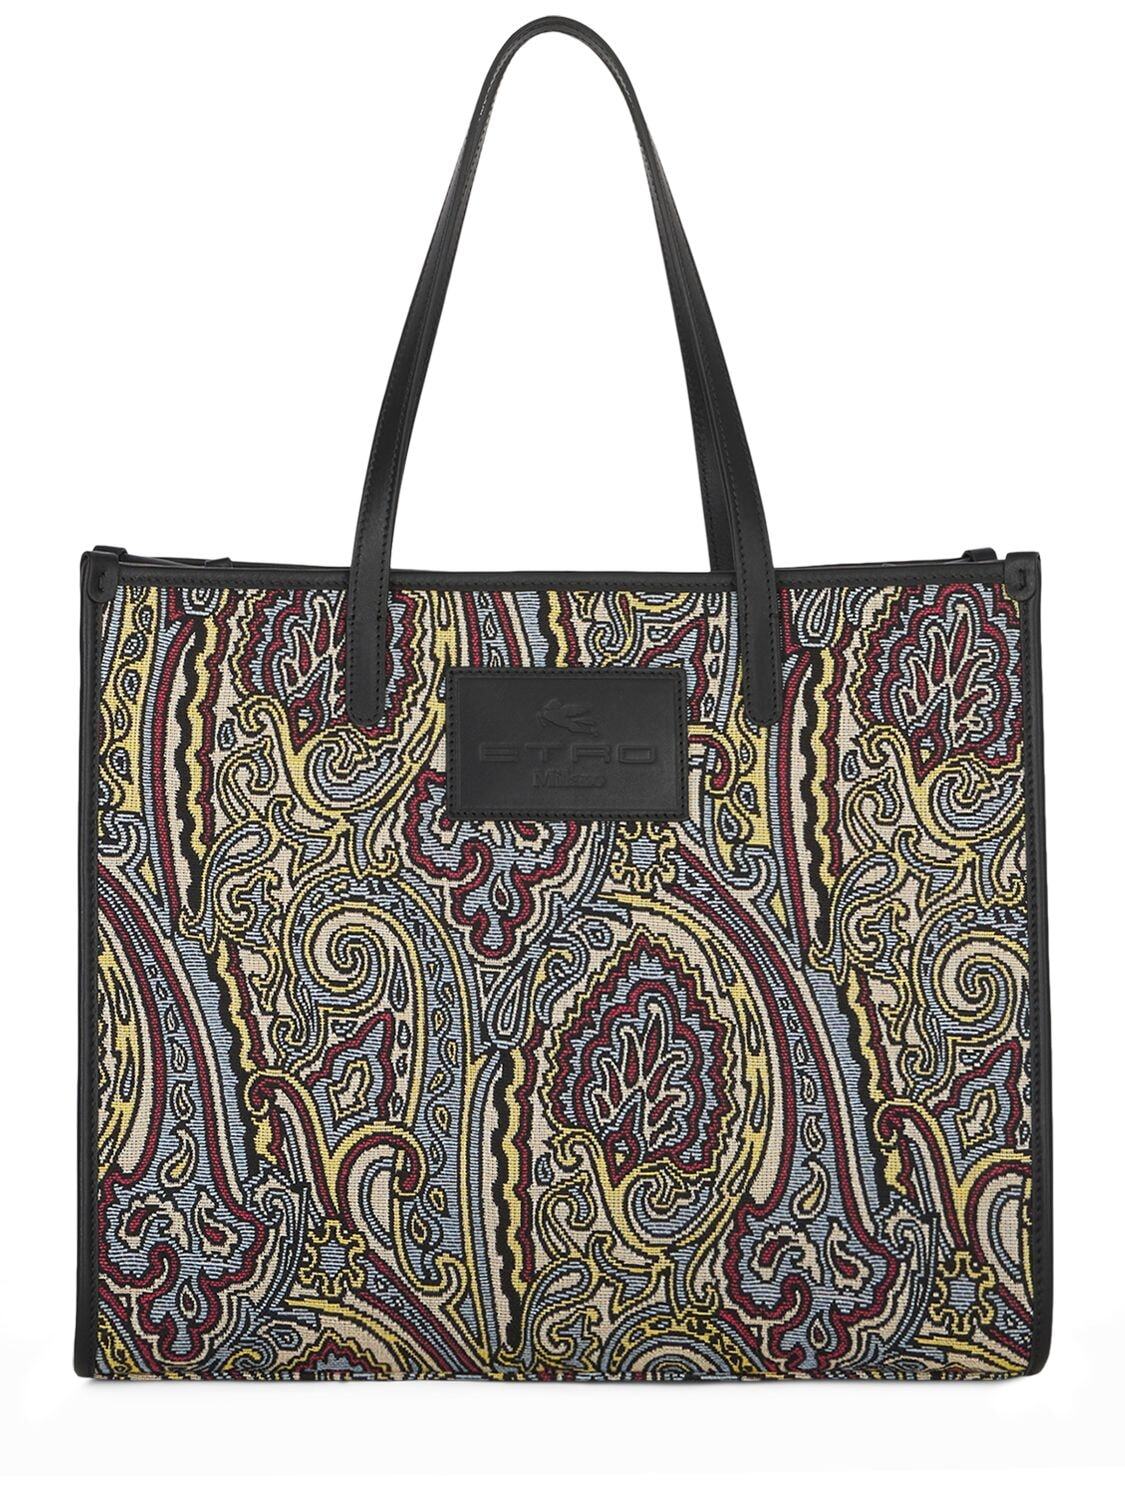 ETRO Globetrotter Jacquard & Leather Tote Bag in blue